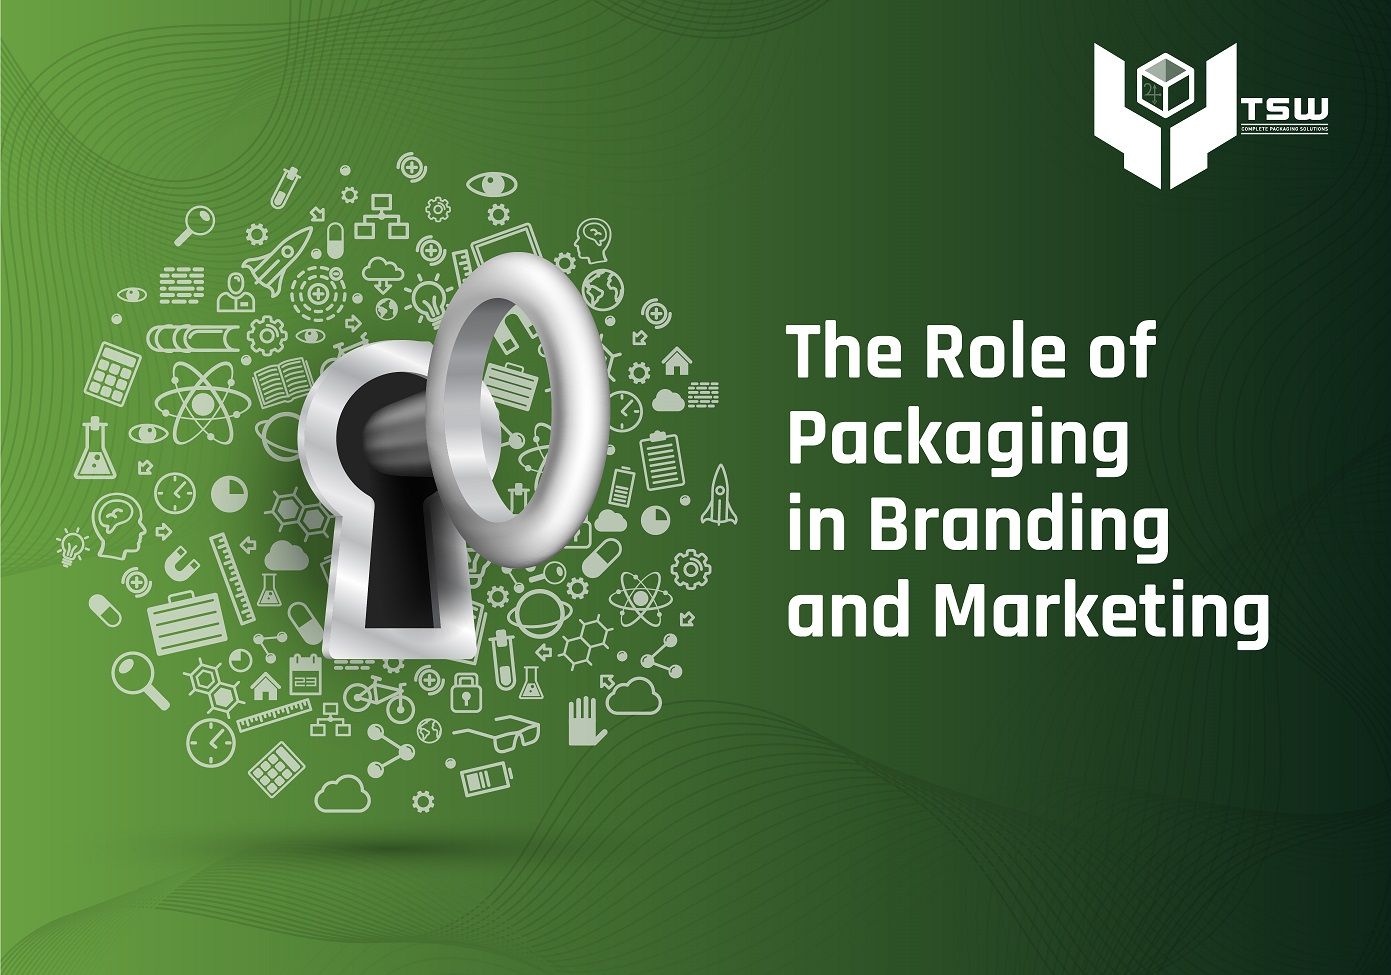 The Role of Packaging in Branding and Marketing